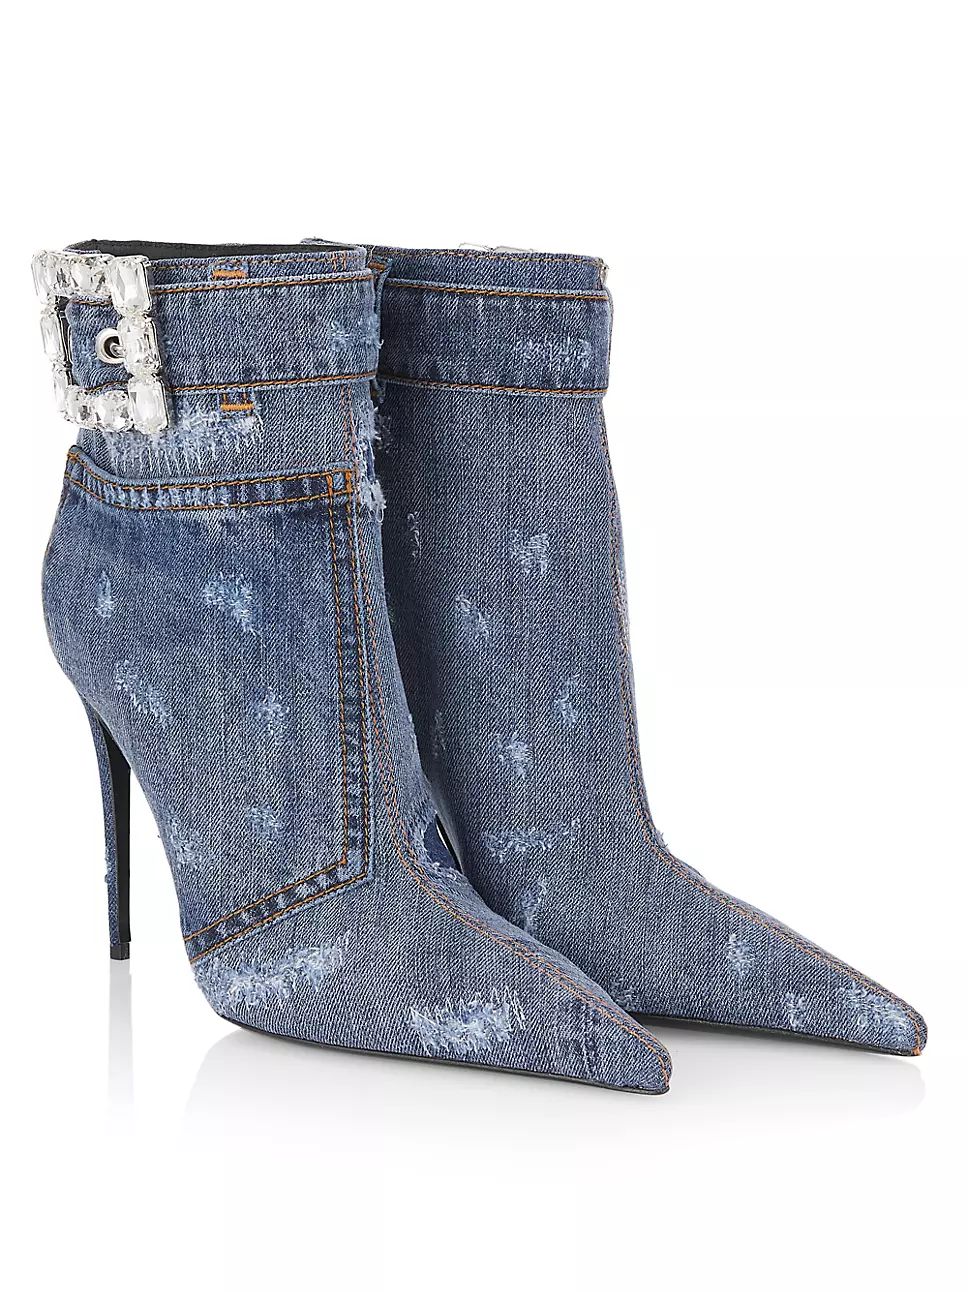 Patchwork Jeans 105 Ankle Booties | Saks Fifth Avenue